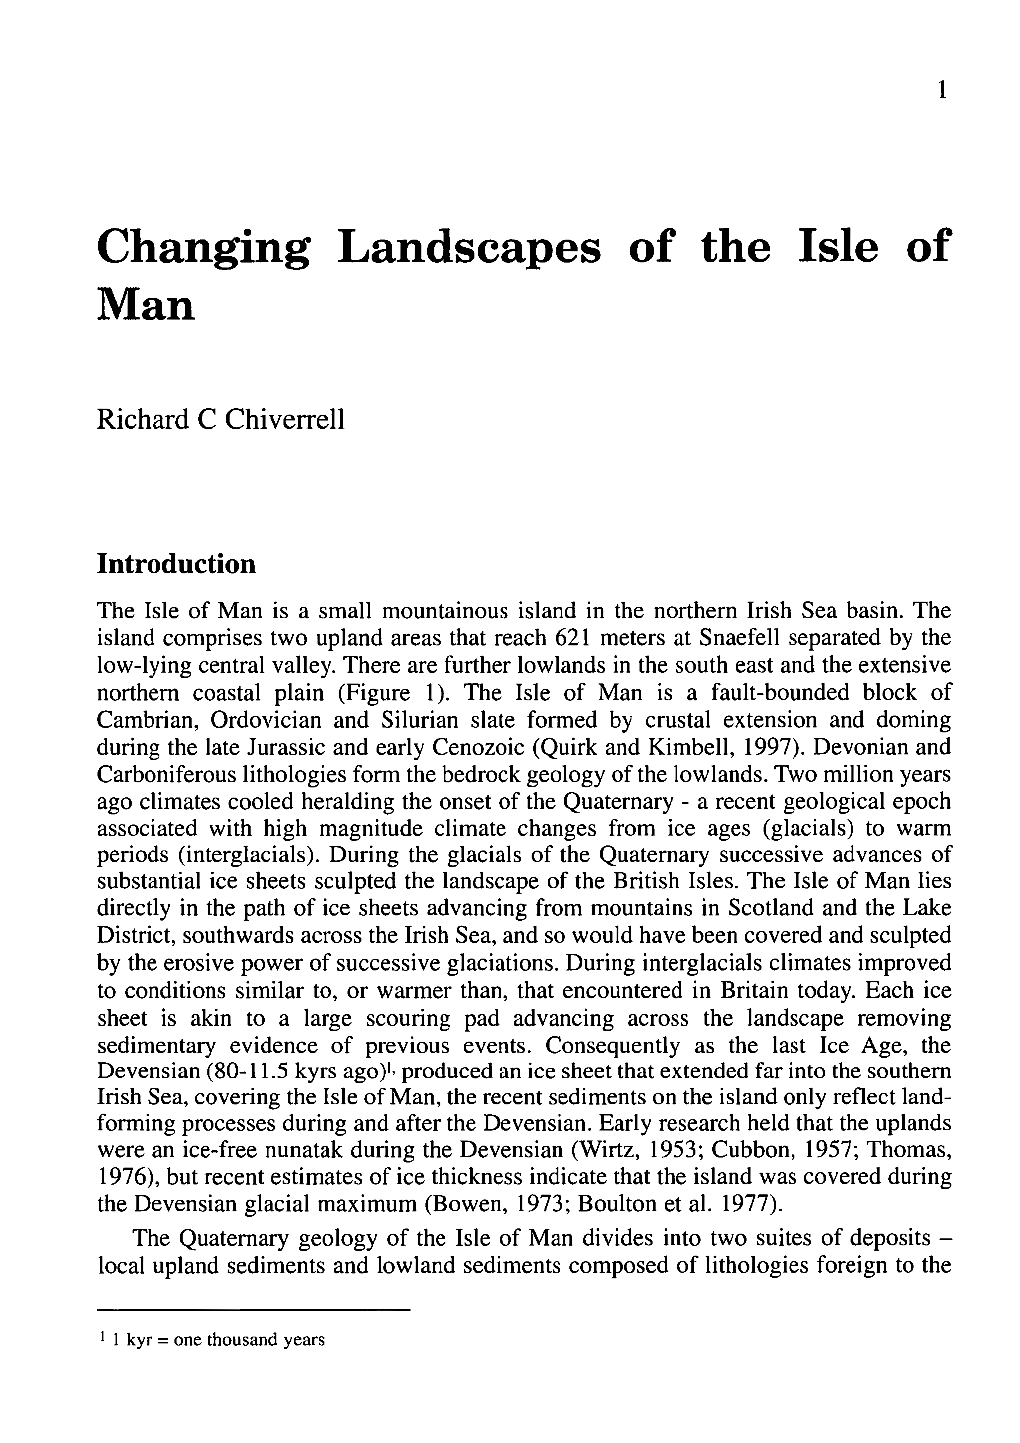 Changing Landscapes of the Isle of Man